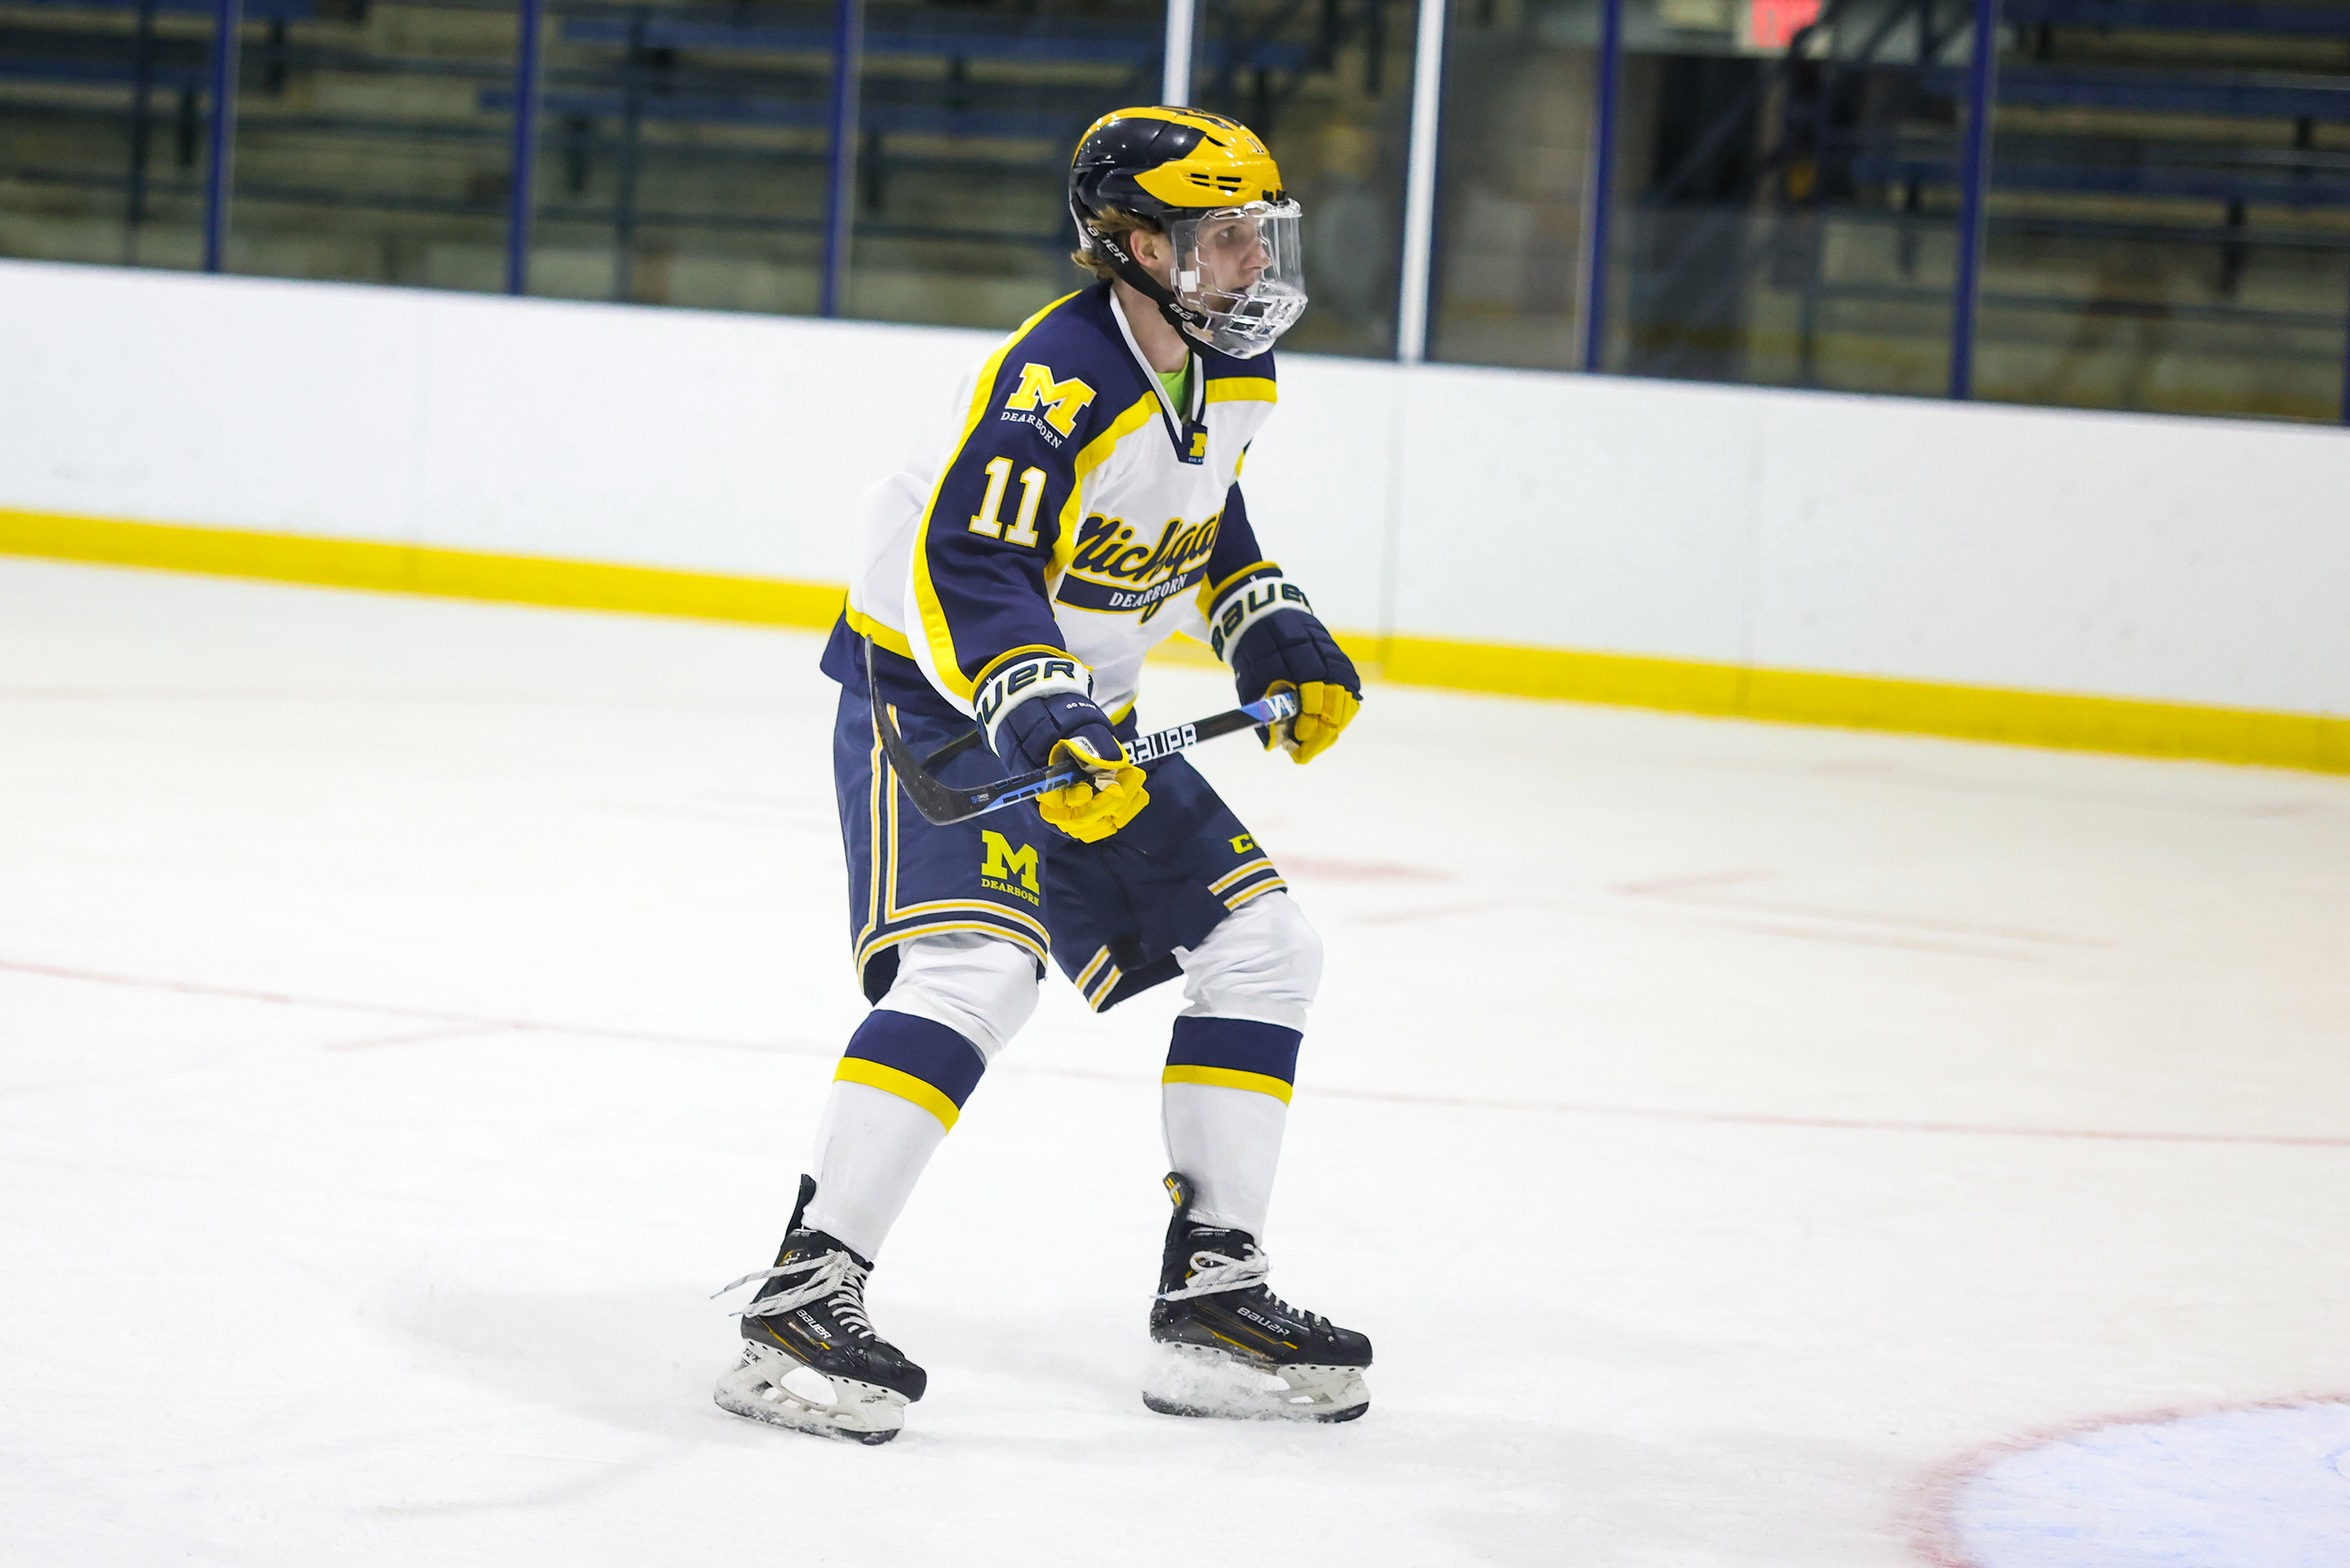 Byrd Records 100th Career Point in 4-1 Victory Over Concordia (MI)